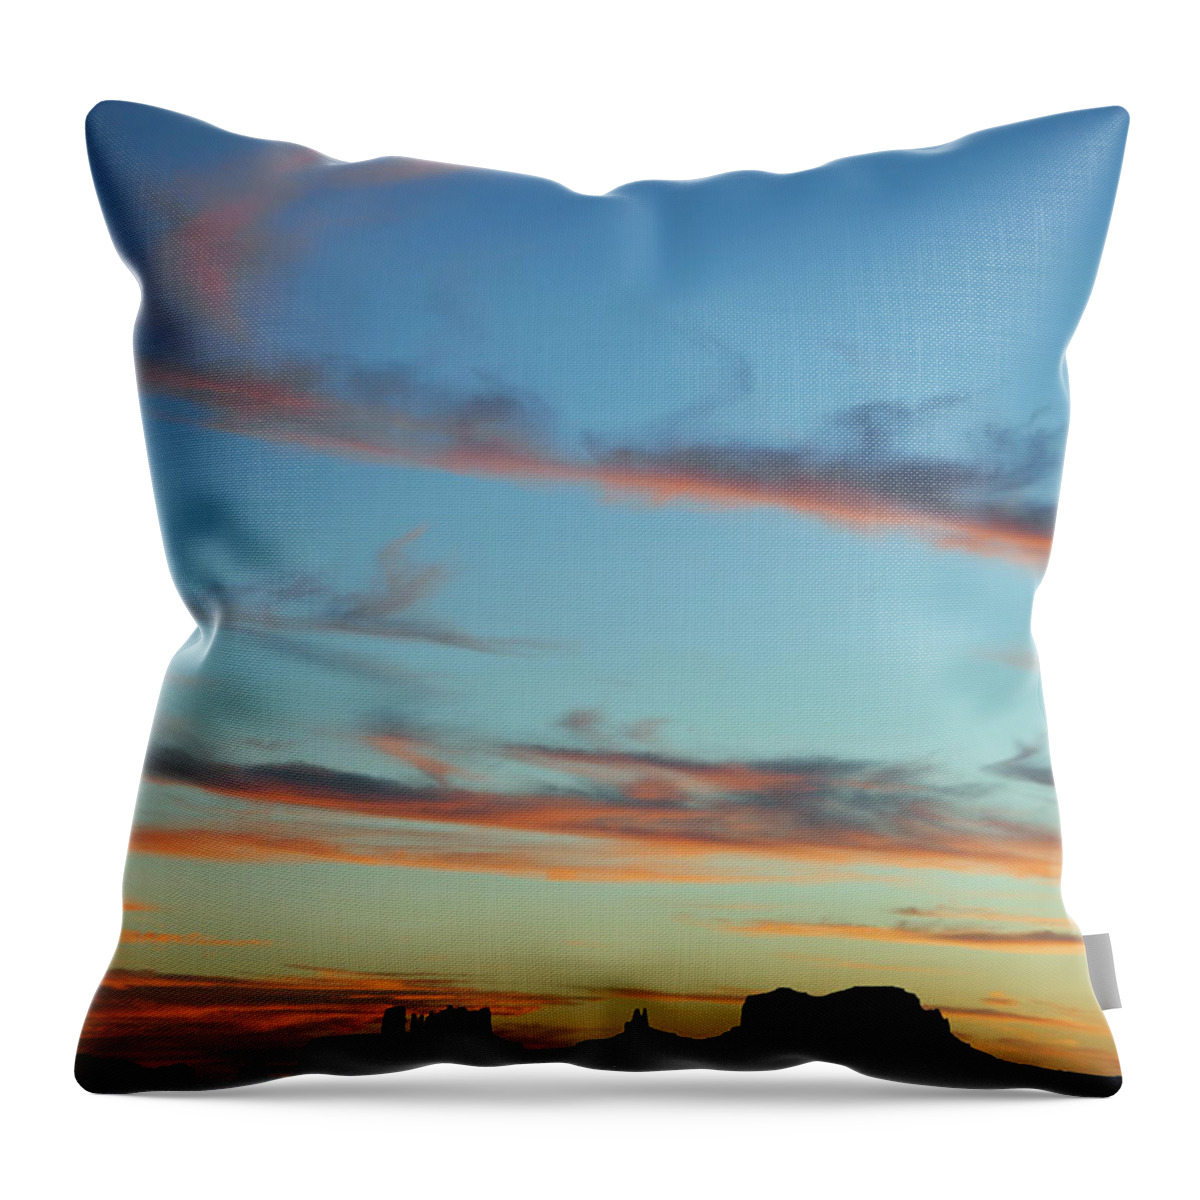 Justjeffaz Throw Pillow featuring the photograph Monument Valley Sunset 3 by JustJeffAz Photography